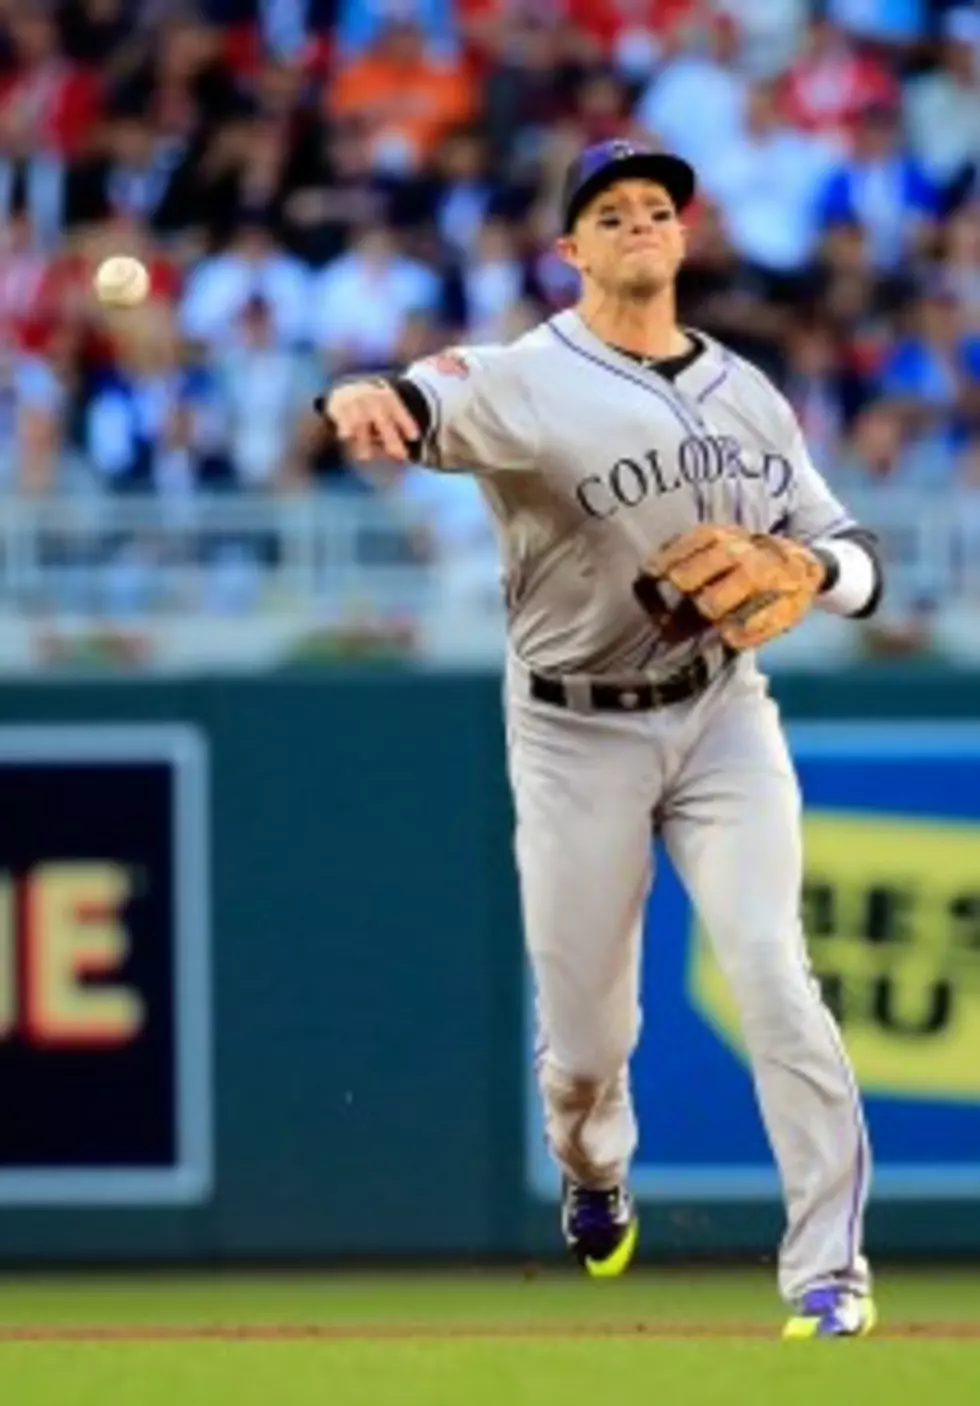 Tulo would be the death knell of the Mets